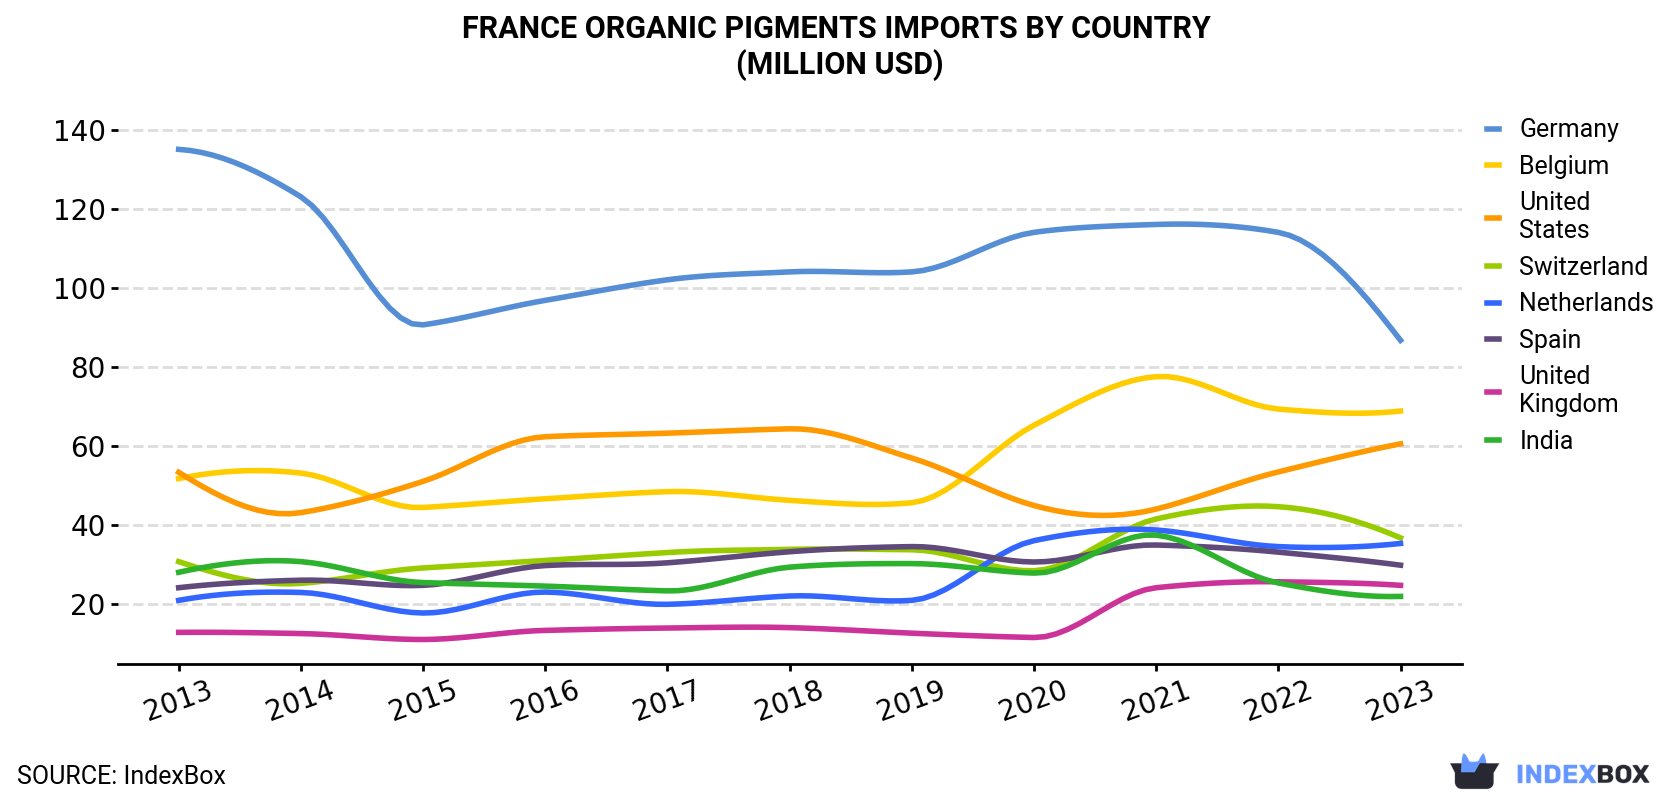 France Organic Pigments Imports By Country (Million USD)